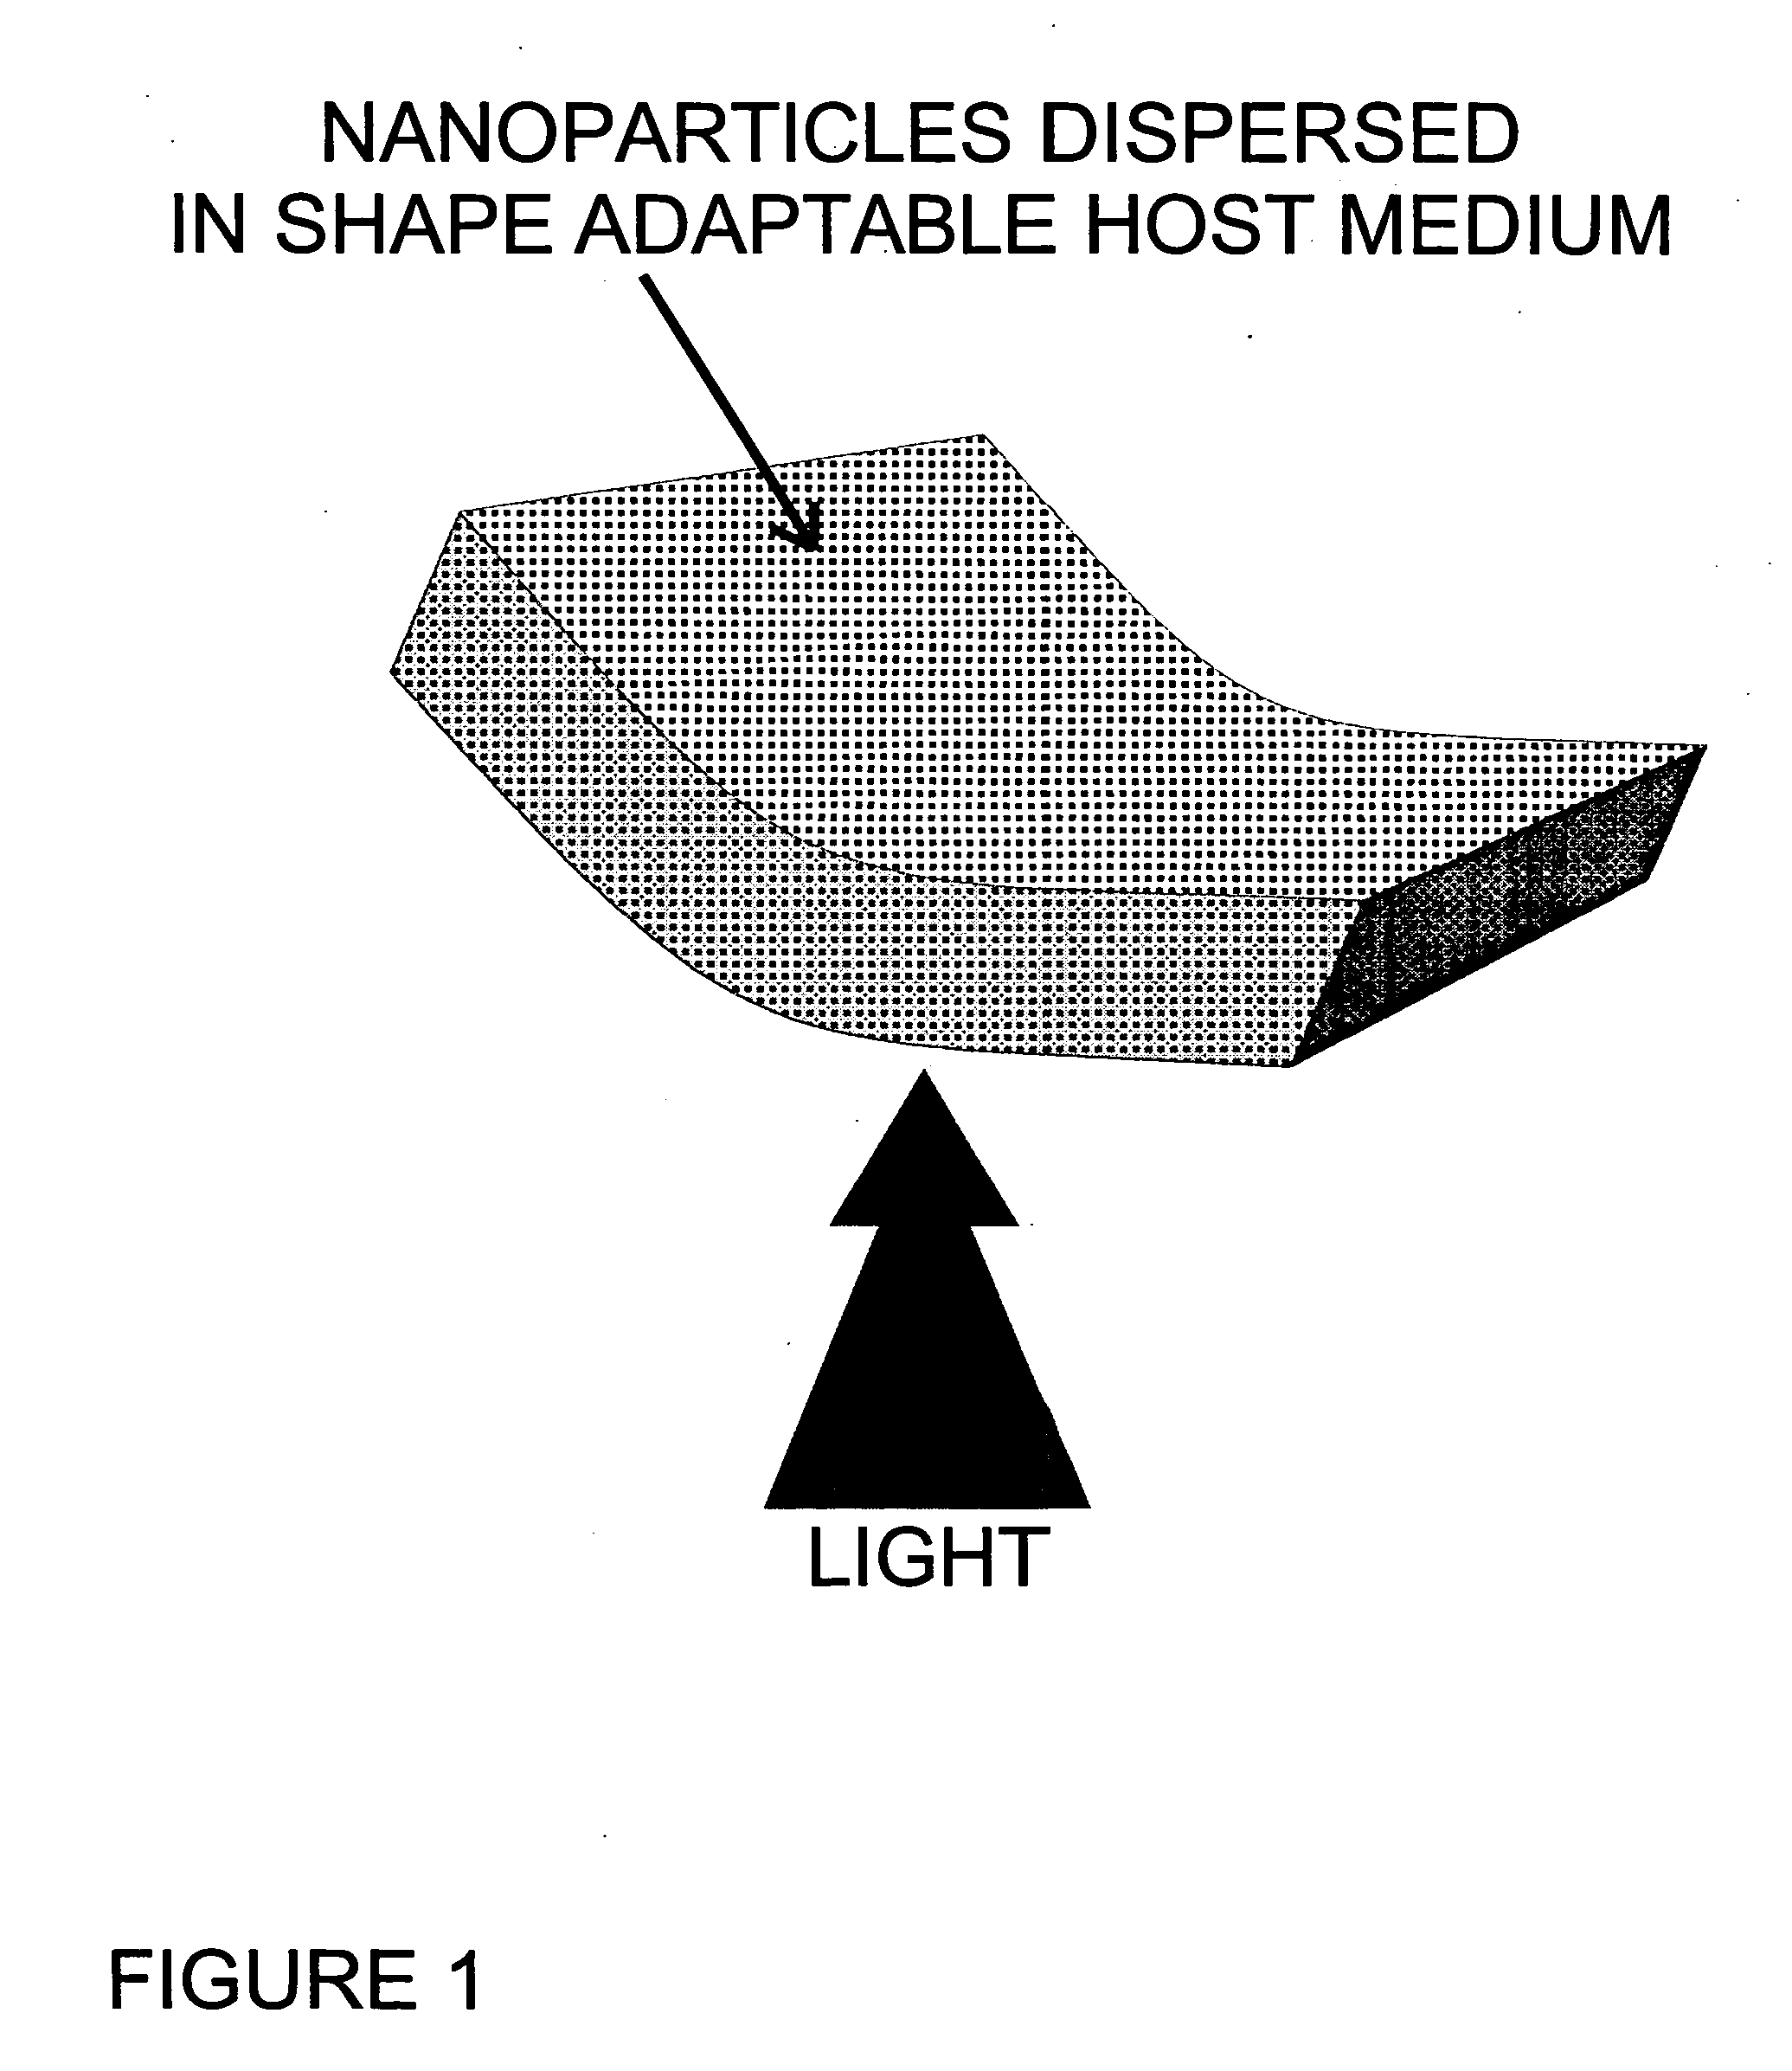 Shape-adaptable and spectral-selective distributed light sources using passive host medium